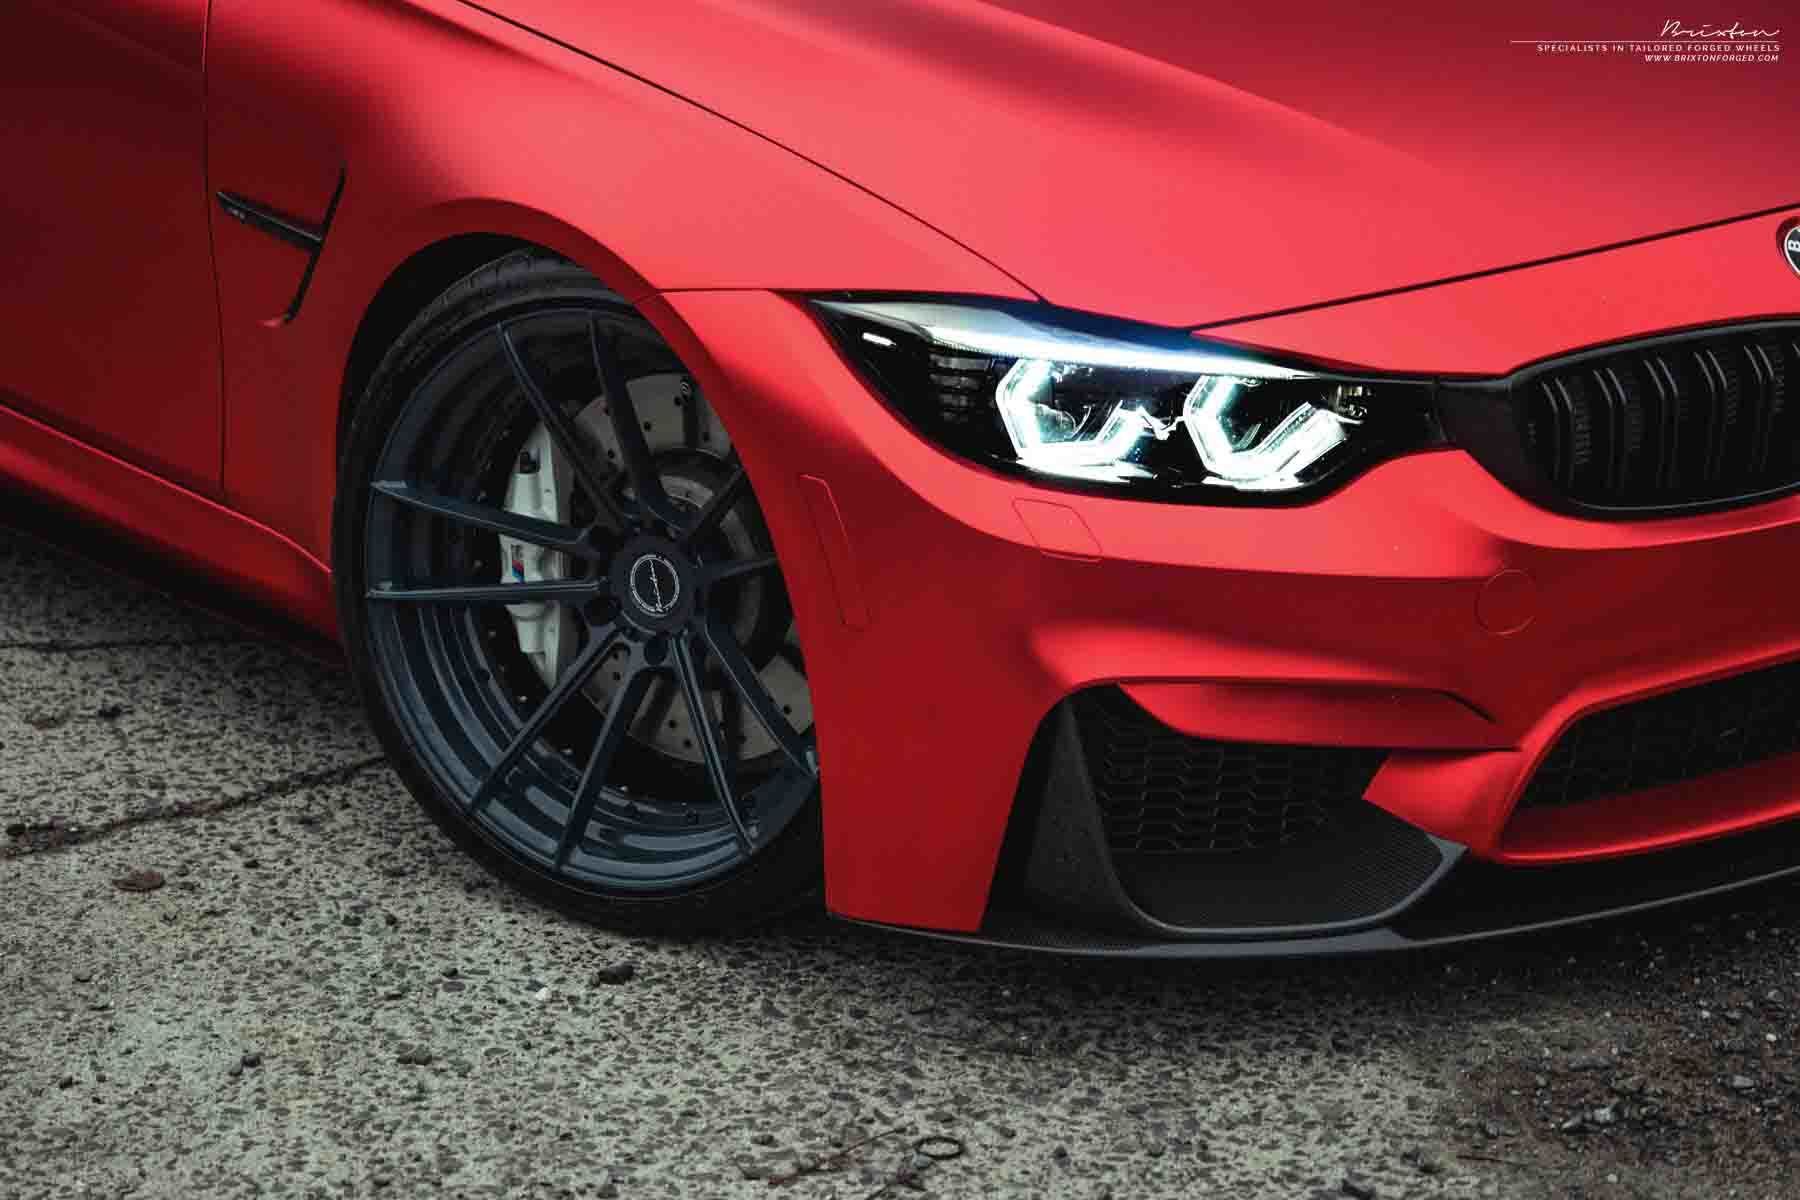 images-products-1-2195-232974483-brixton-forged-wheels-matte-red-frozen-red-bmw-f80-m3-brixton-forged-m51-duo-series-forged-wheel.jpg